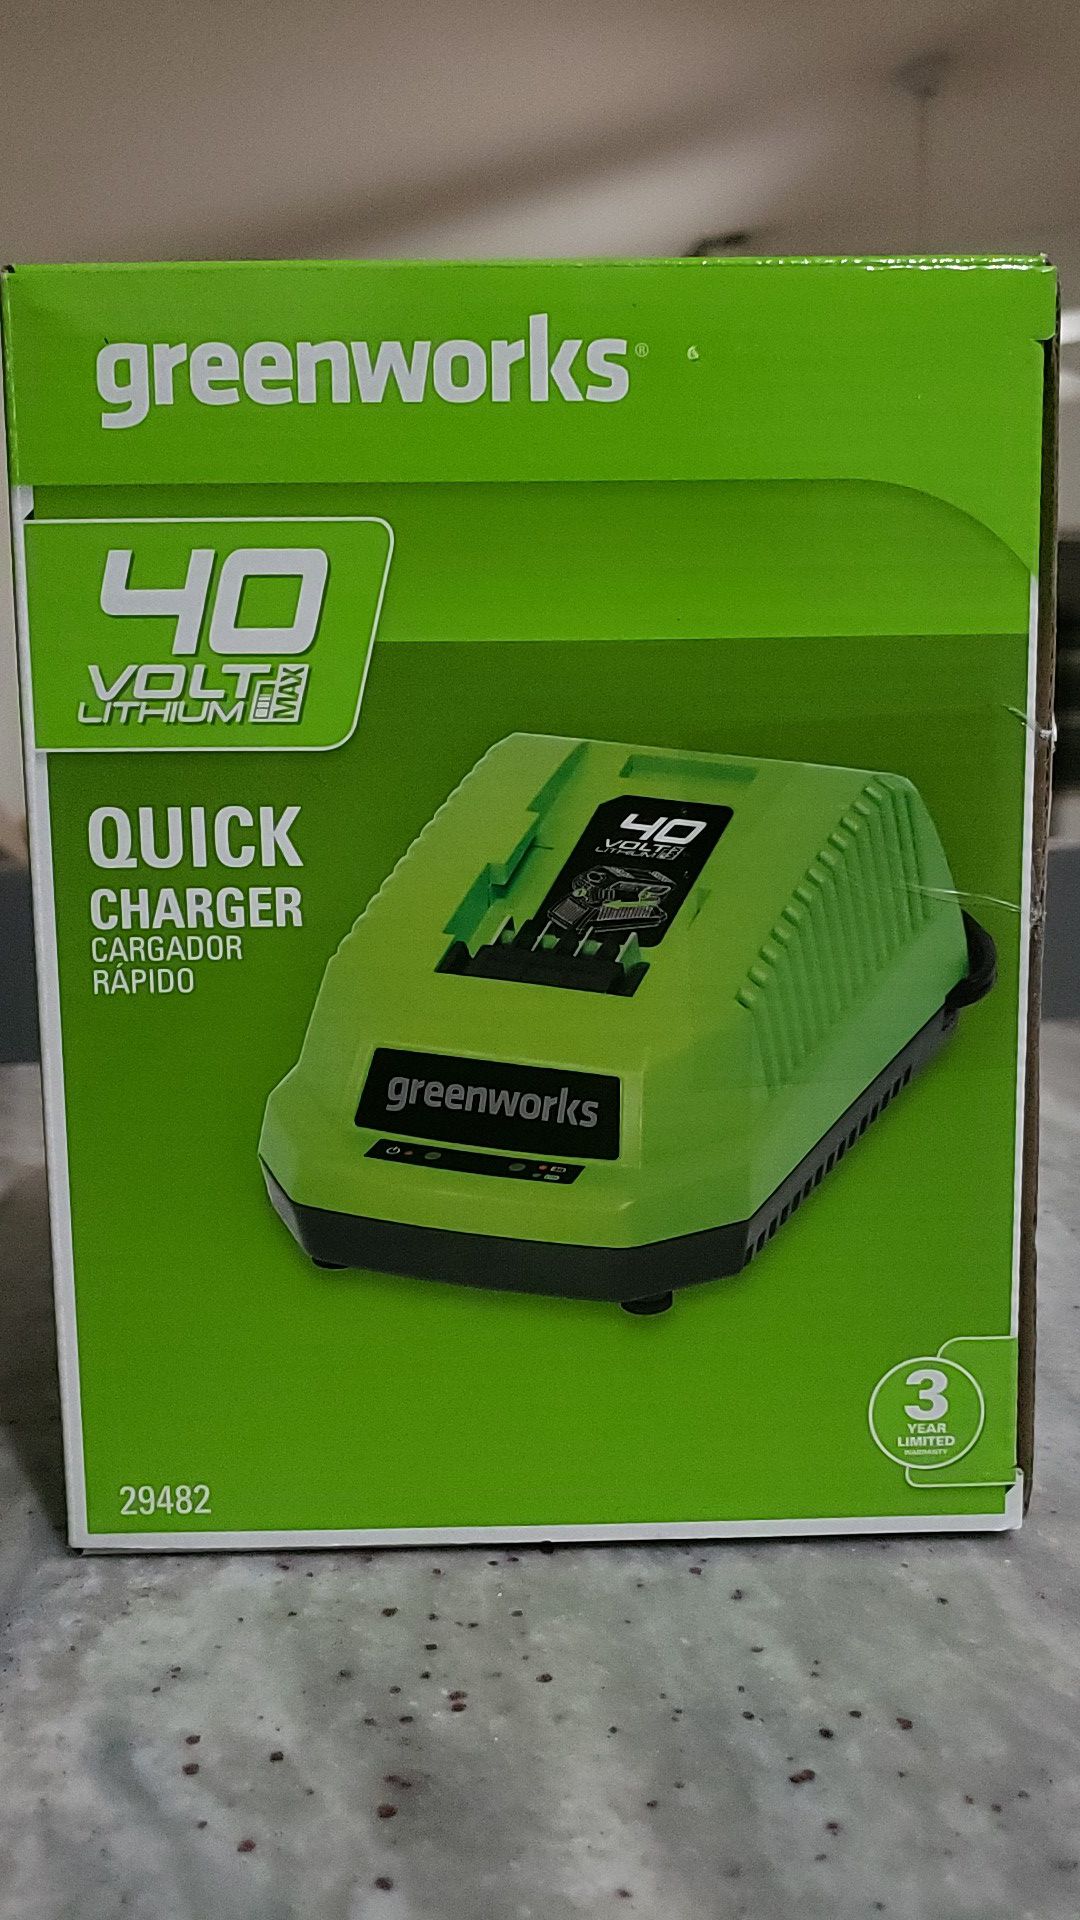 Greenworks quick charger